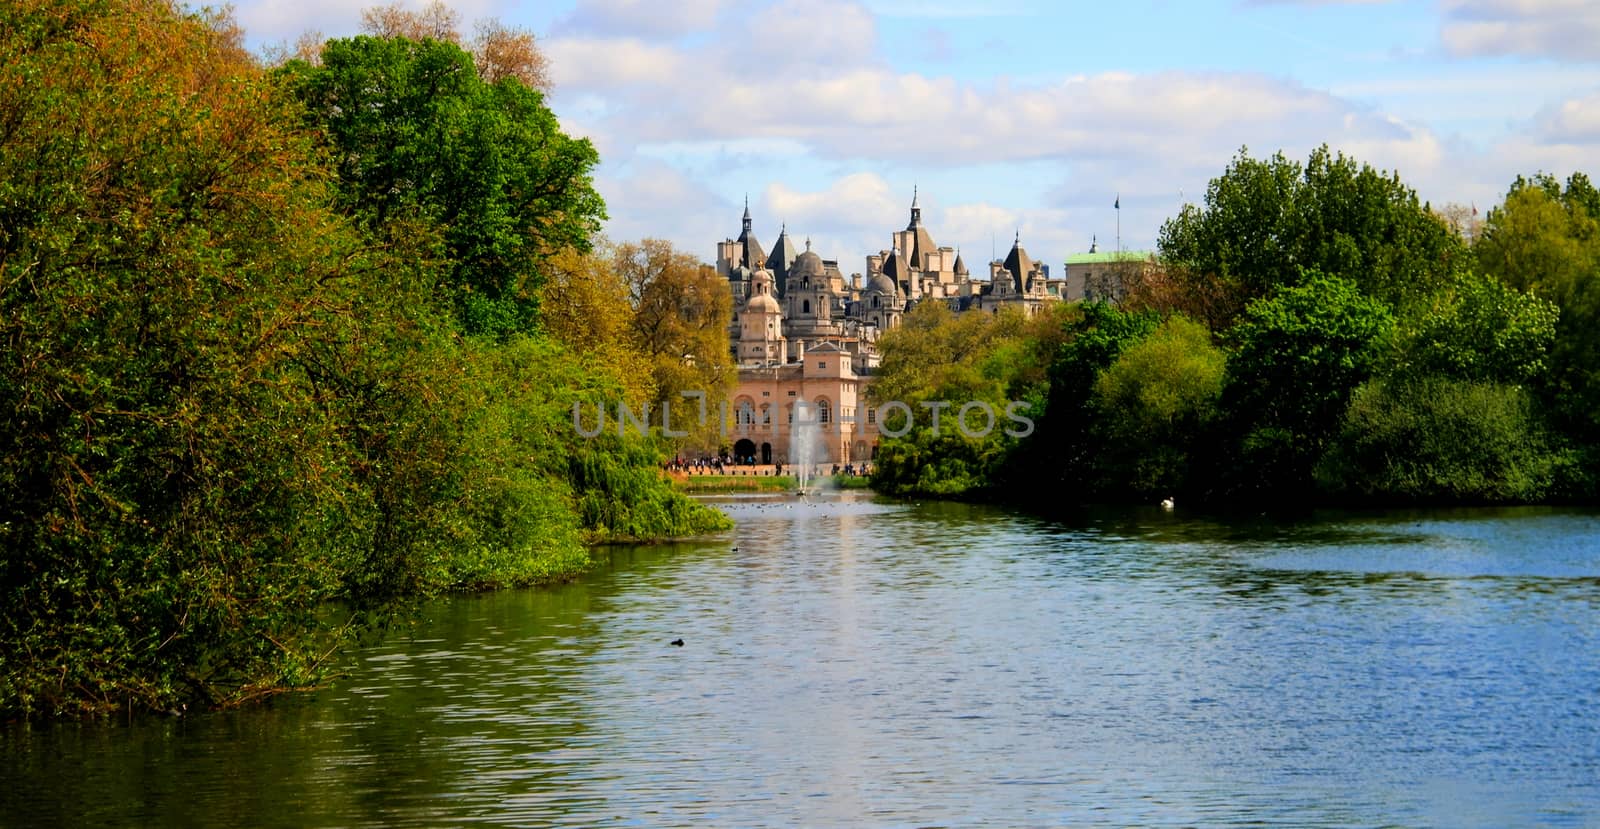 Summer view to St James's Park and The Household Cavalry Museum . London, UK by homocosmicos